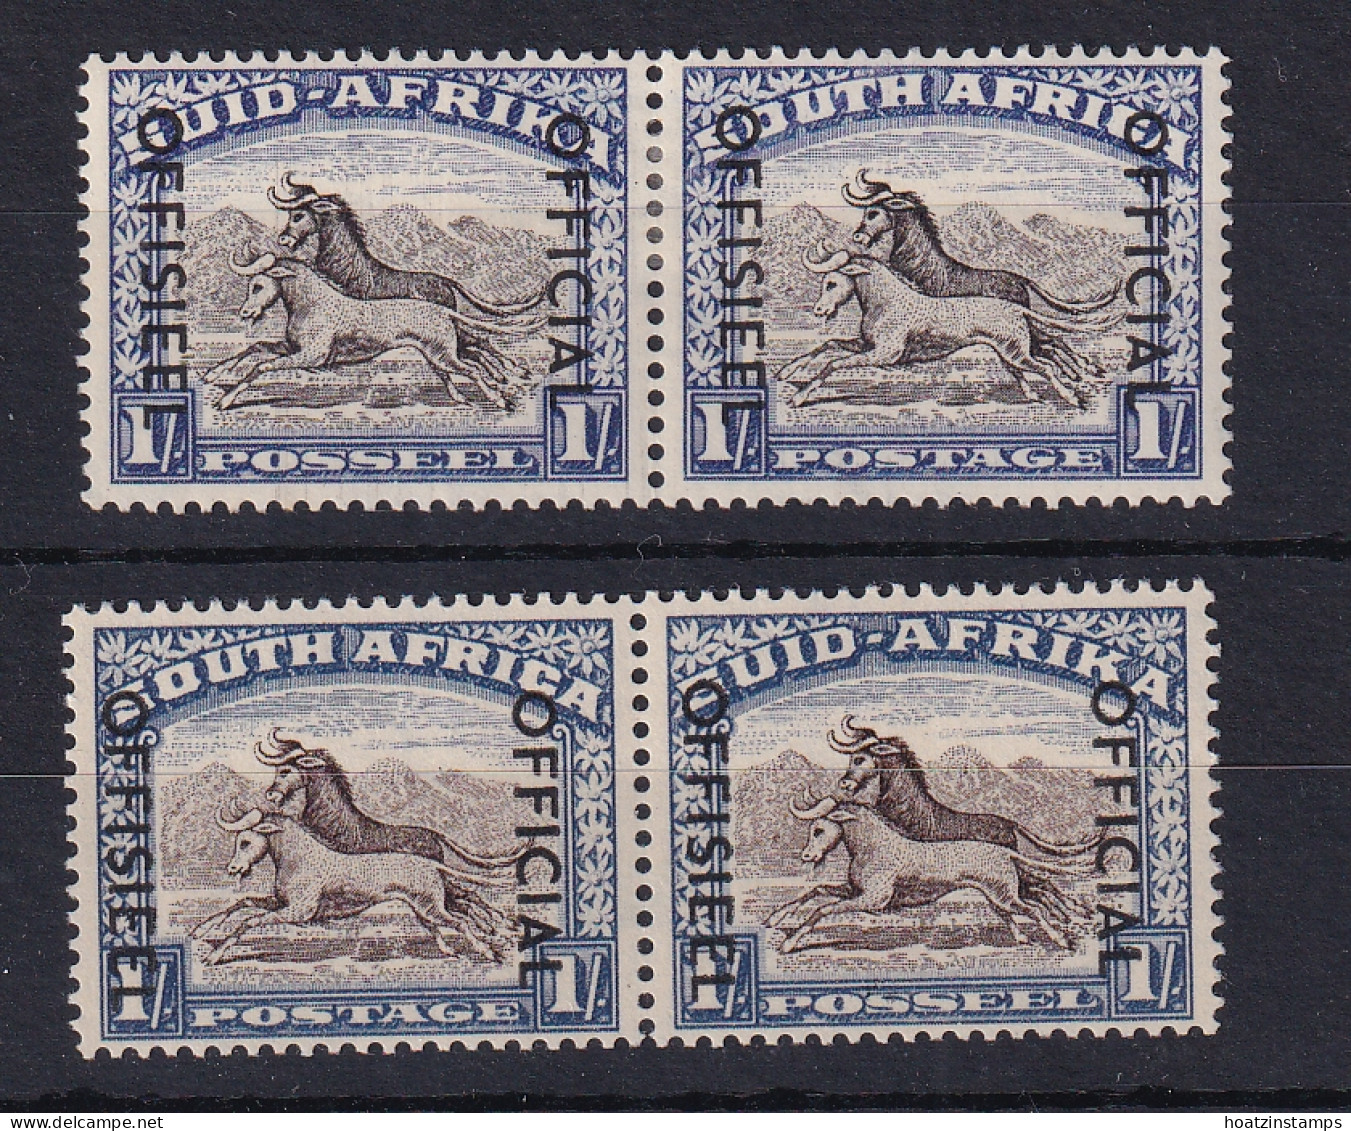 South Africa: 1950/54   Official - Wildebeest   SG O47 / O47a   1/-    MH Pair - Officials